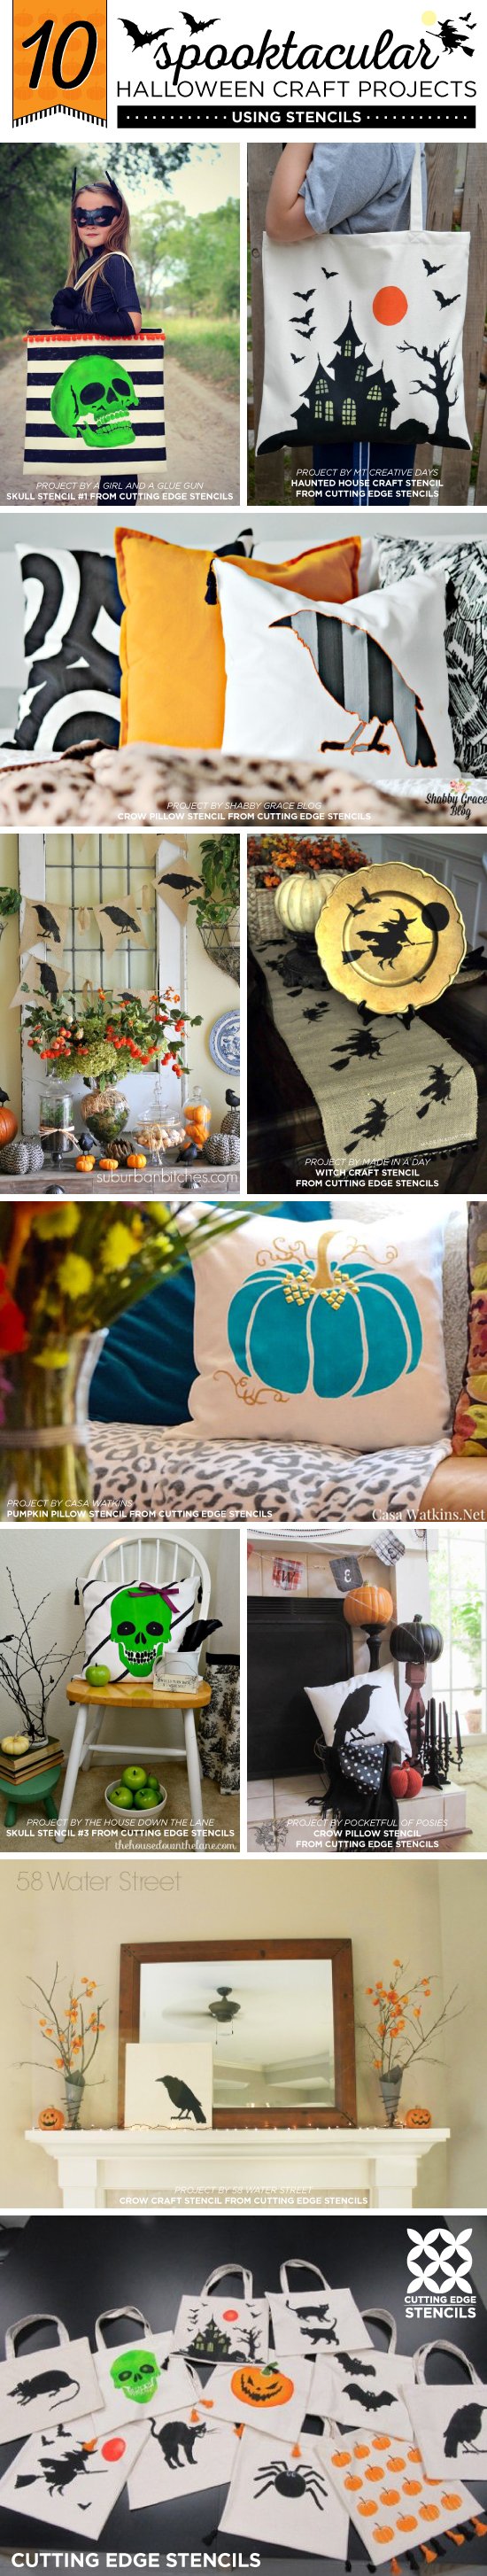 Cutting Edge Stencils shares easy and fun DIY Halloween craft projects using stencil patterns. http://www.cuttingedgestencils.com/halloween-stencils-pumpkin-stencil-stenciled-tote.html